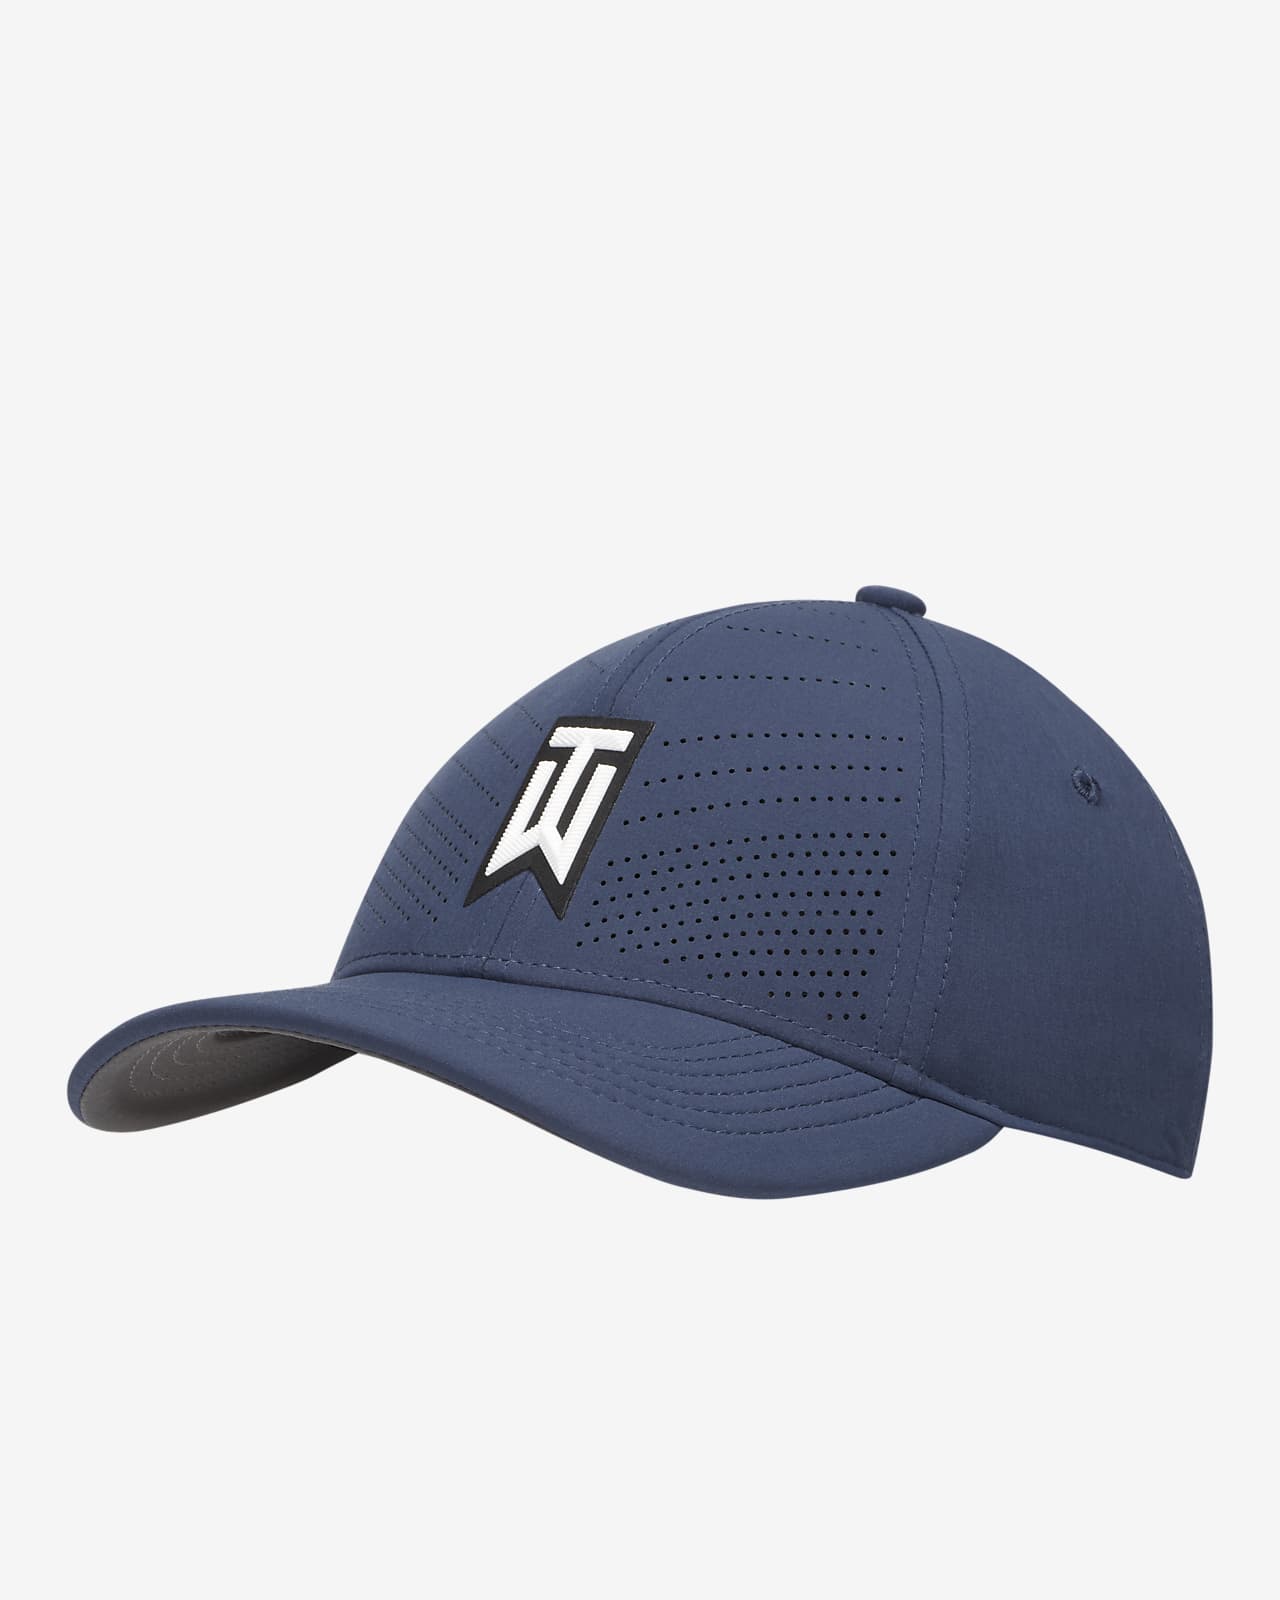 tiger woods hat canada